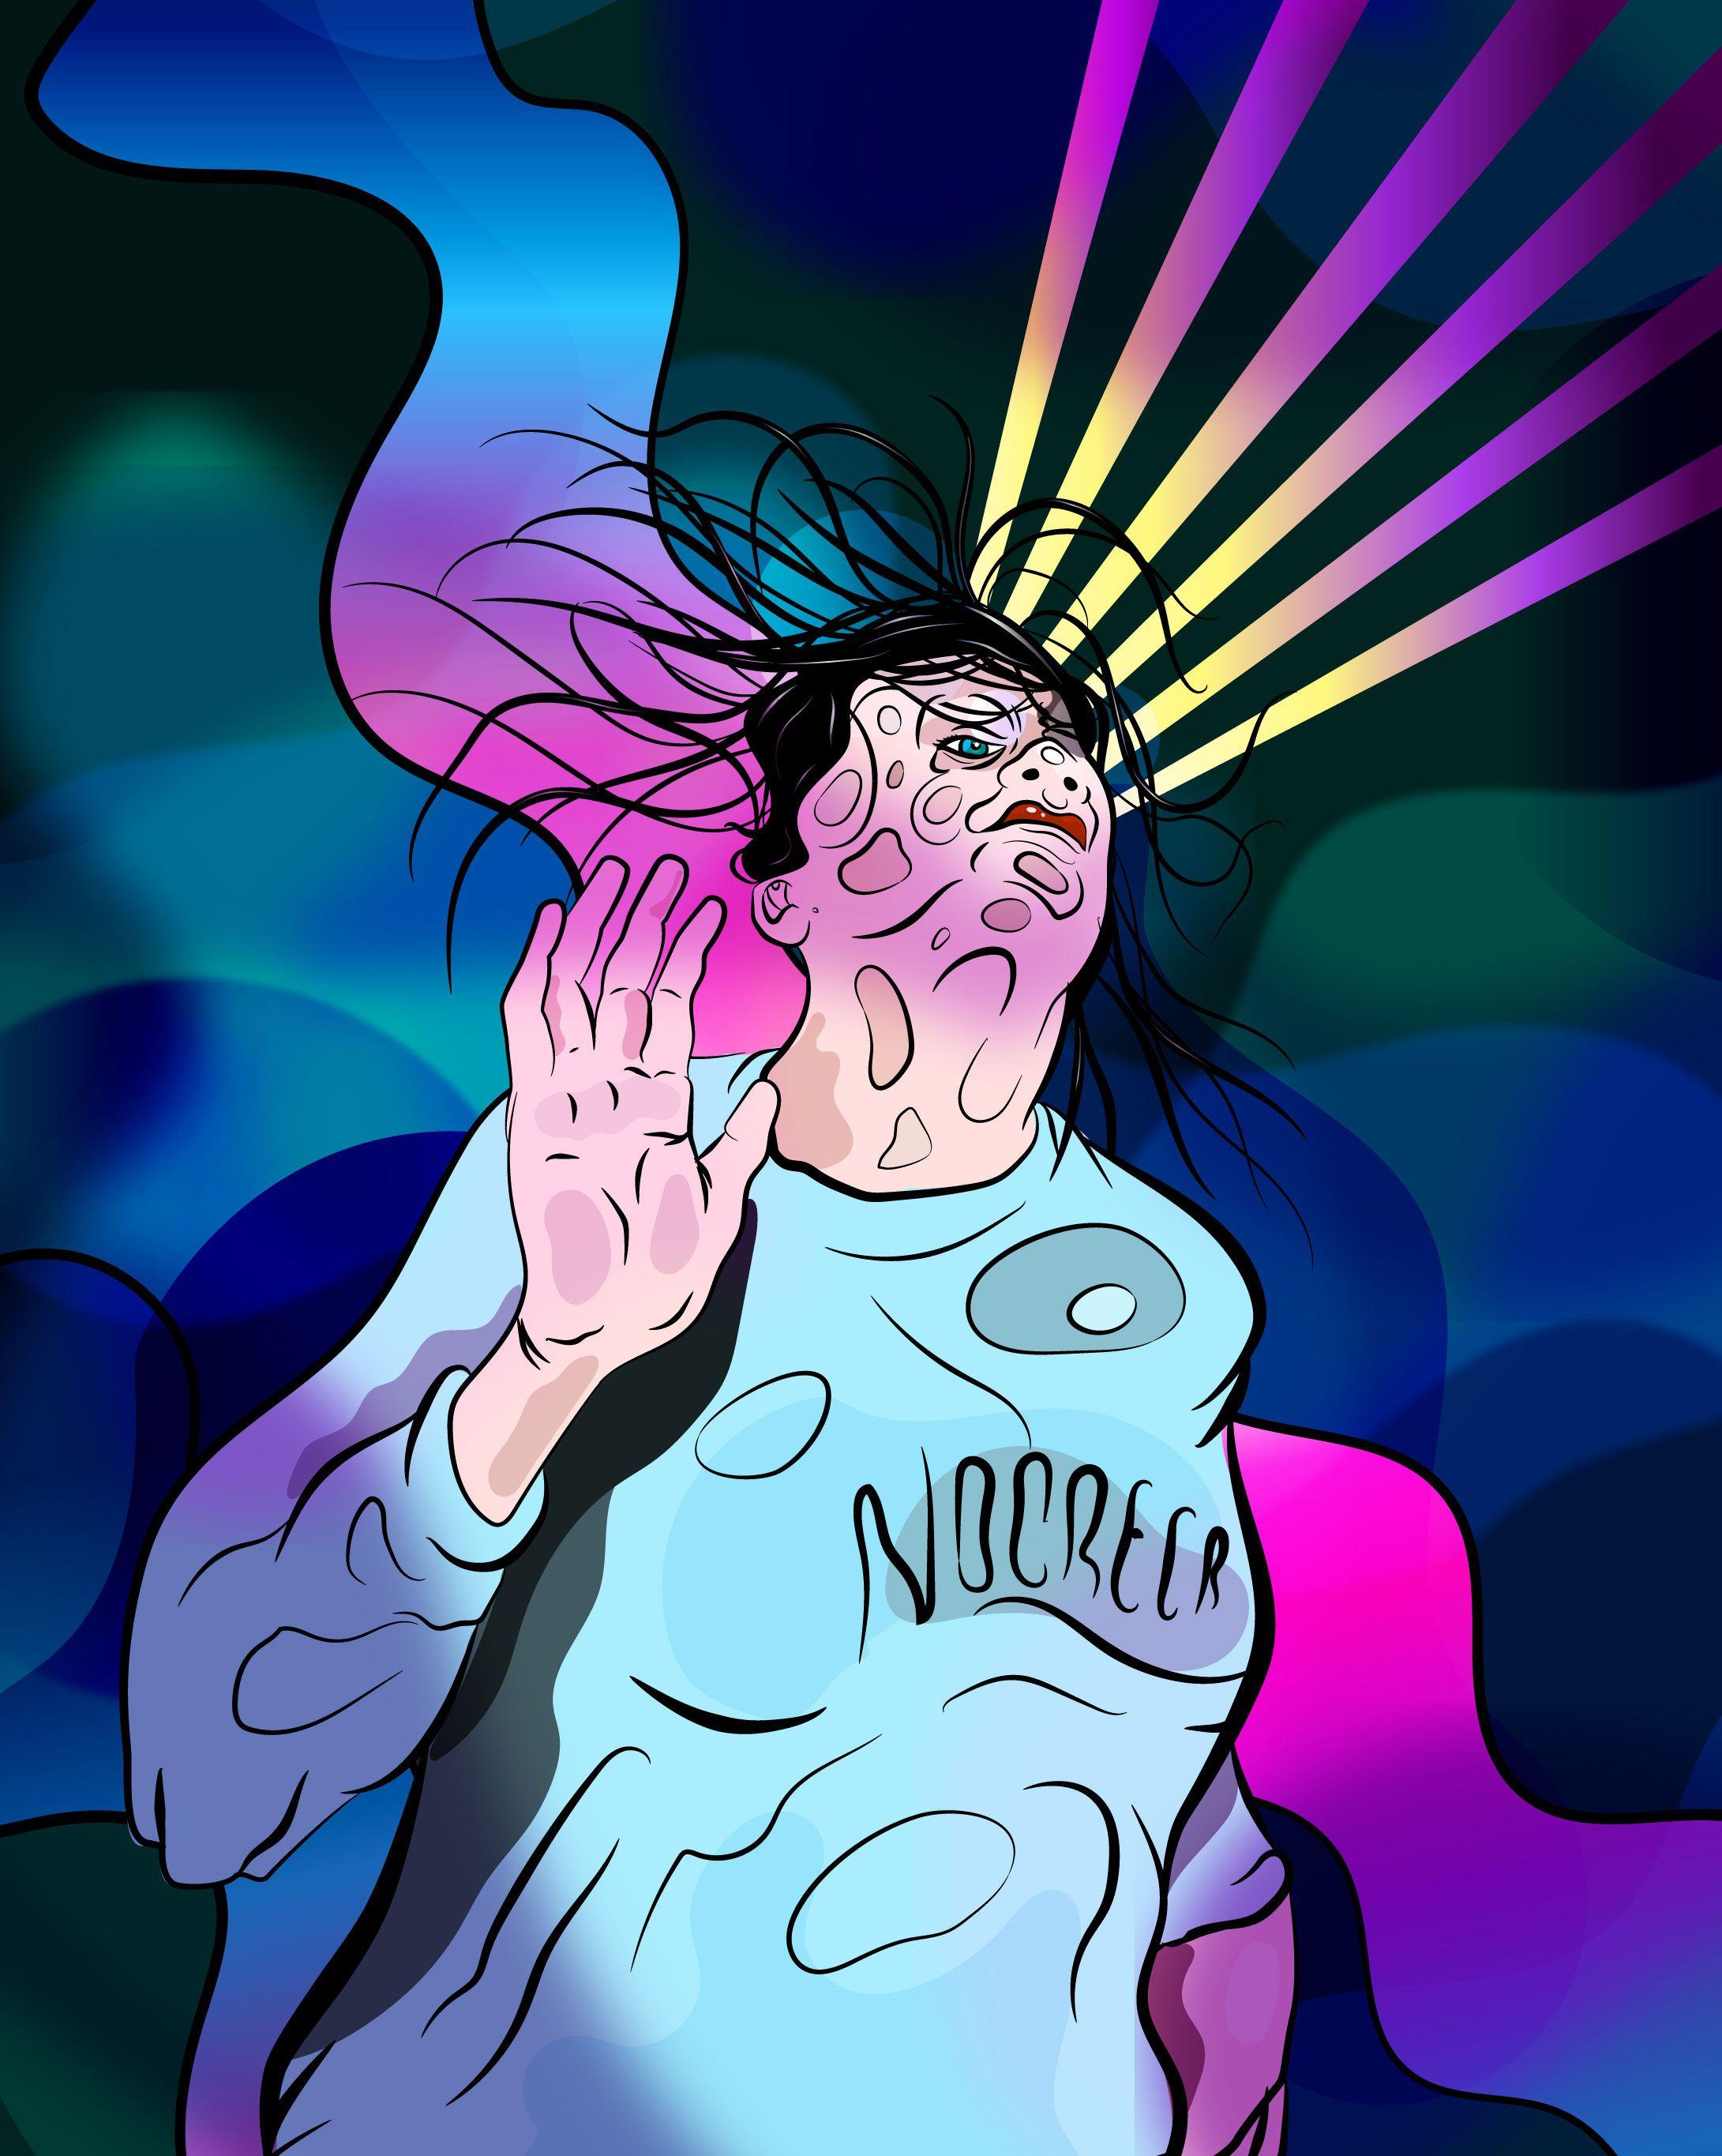 Digital art illustration of a young man in a state of ecstasy dancing in a nightclub using thick vector brush strokes and contrasting bright colours.